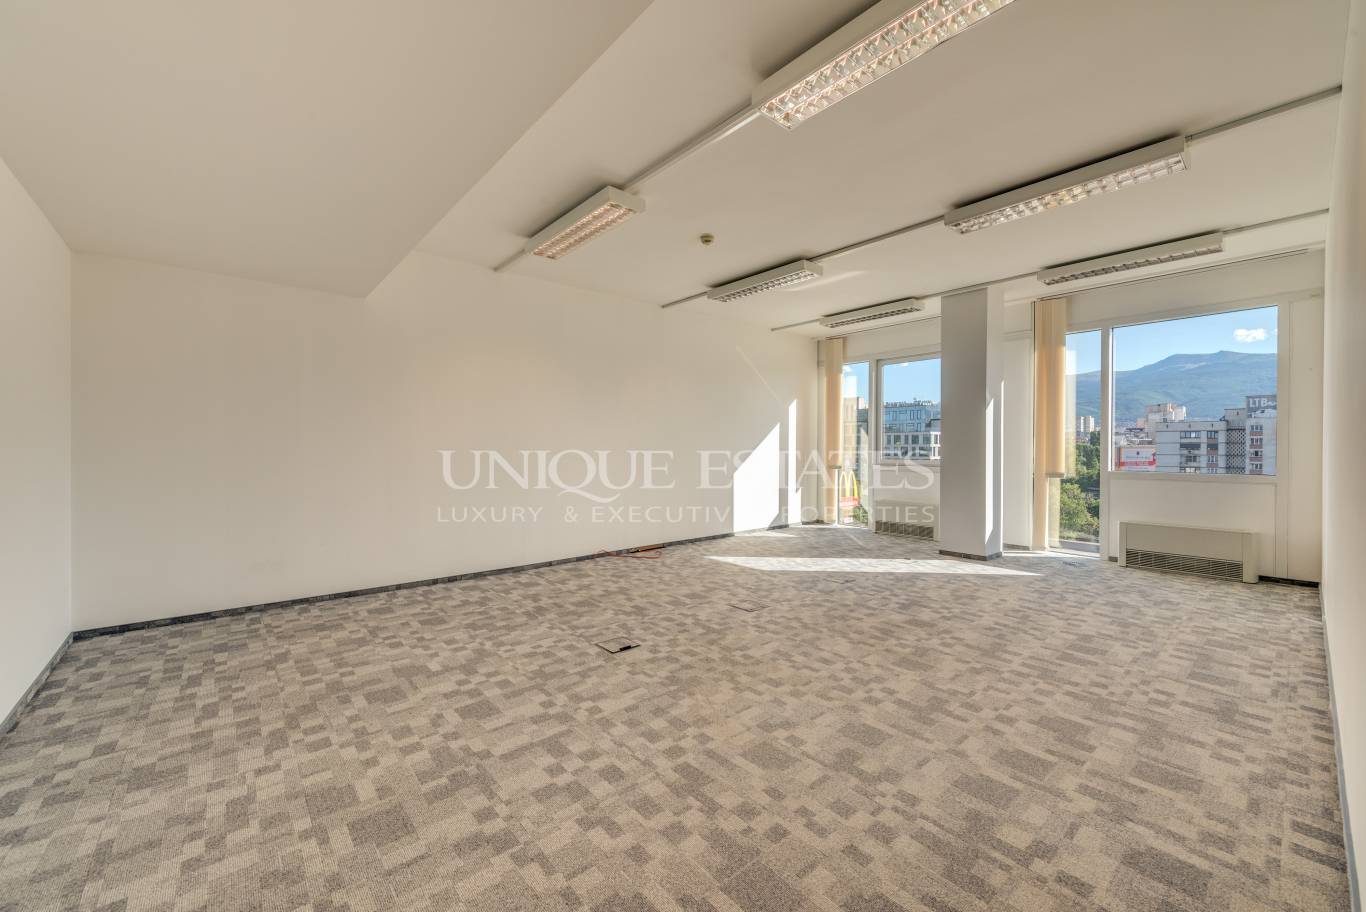 Office for rent in Sofia,  with listing ID: K15521 - image 10